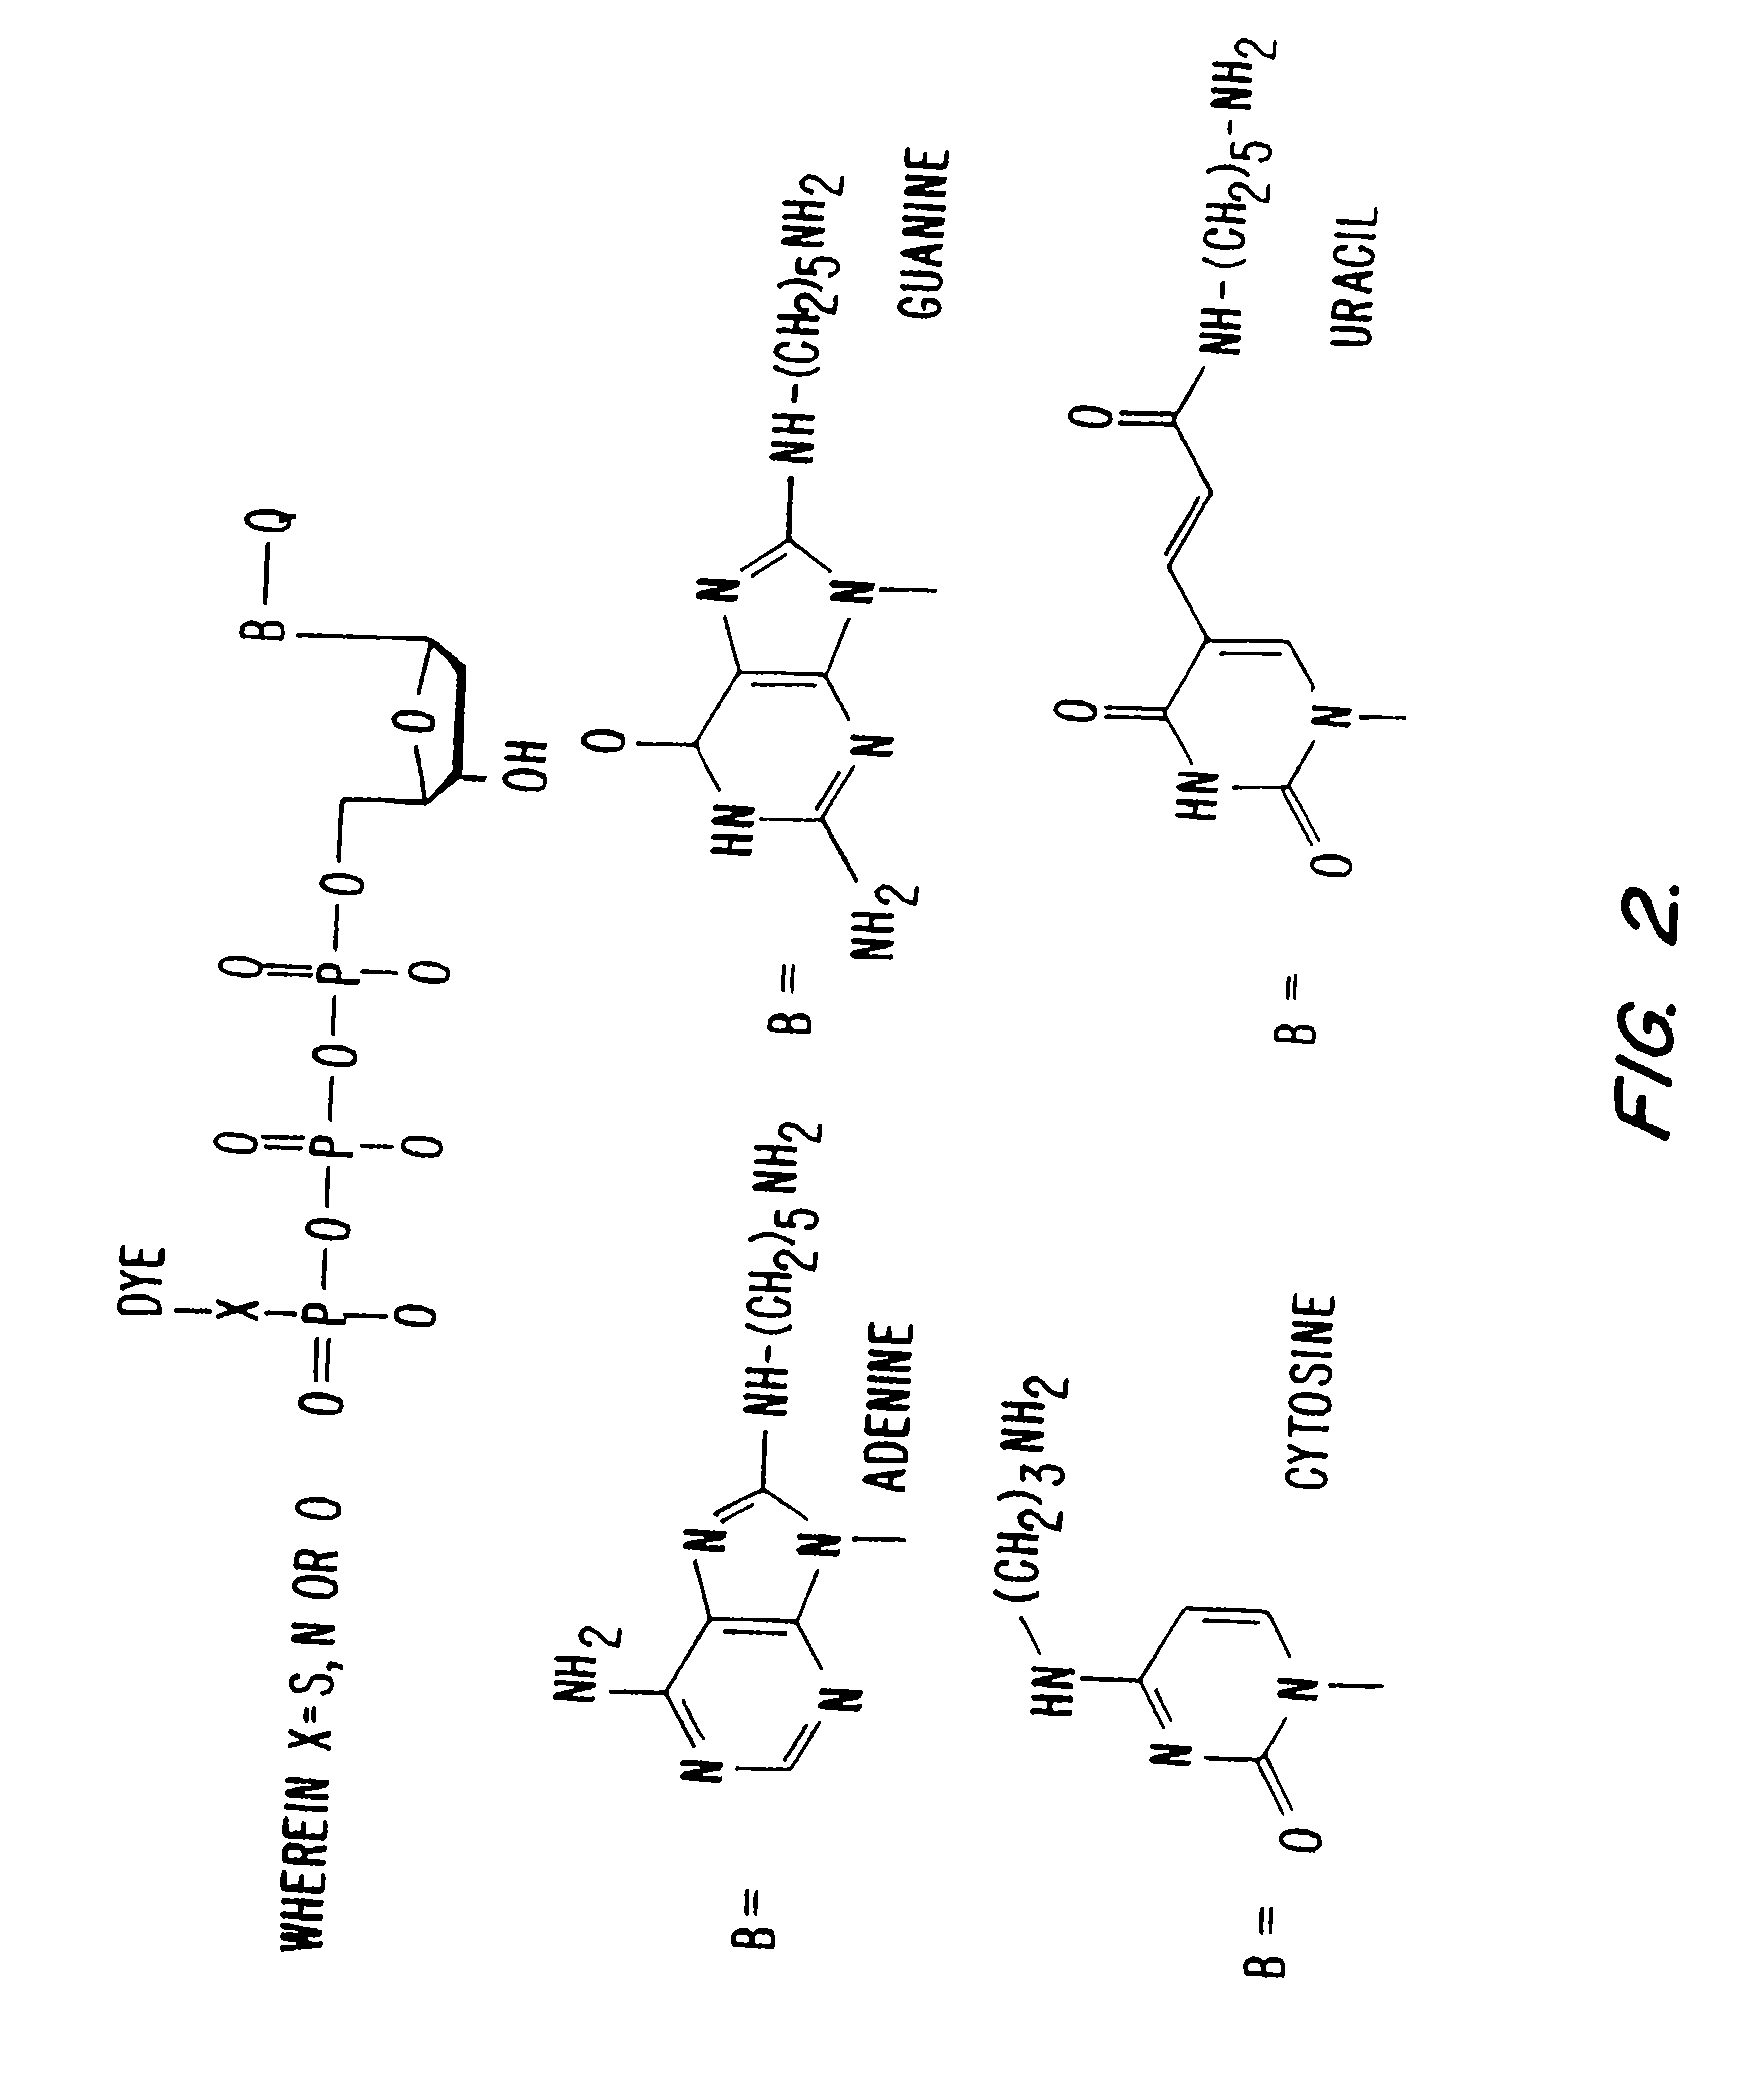 System and methods for nucleic acid sequencing of single molecules by polymerase synthesis